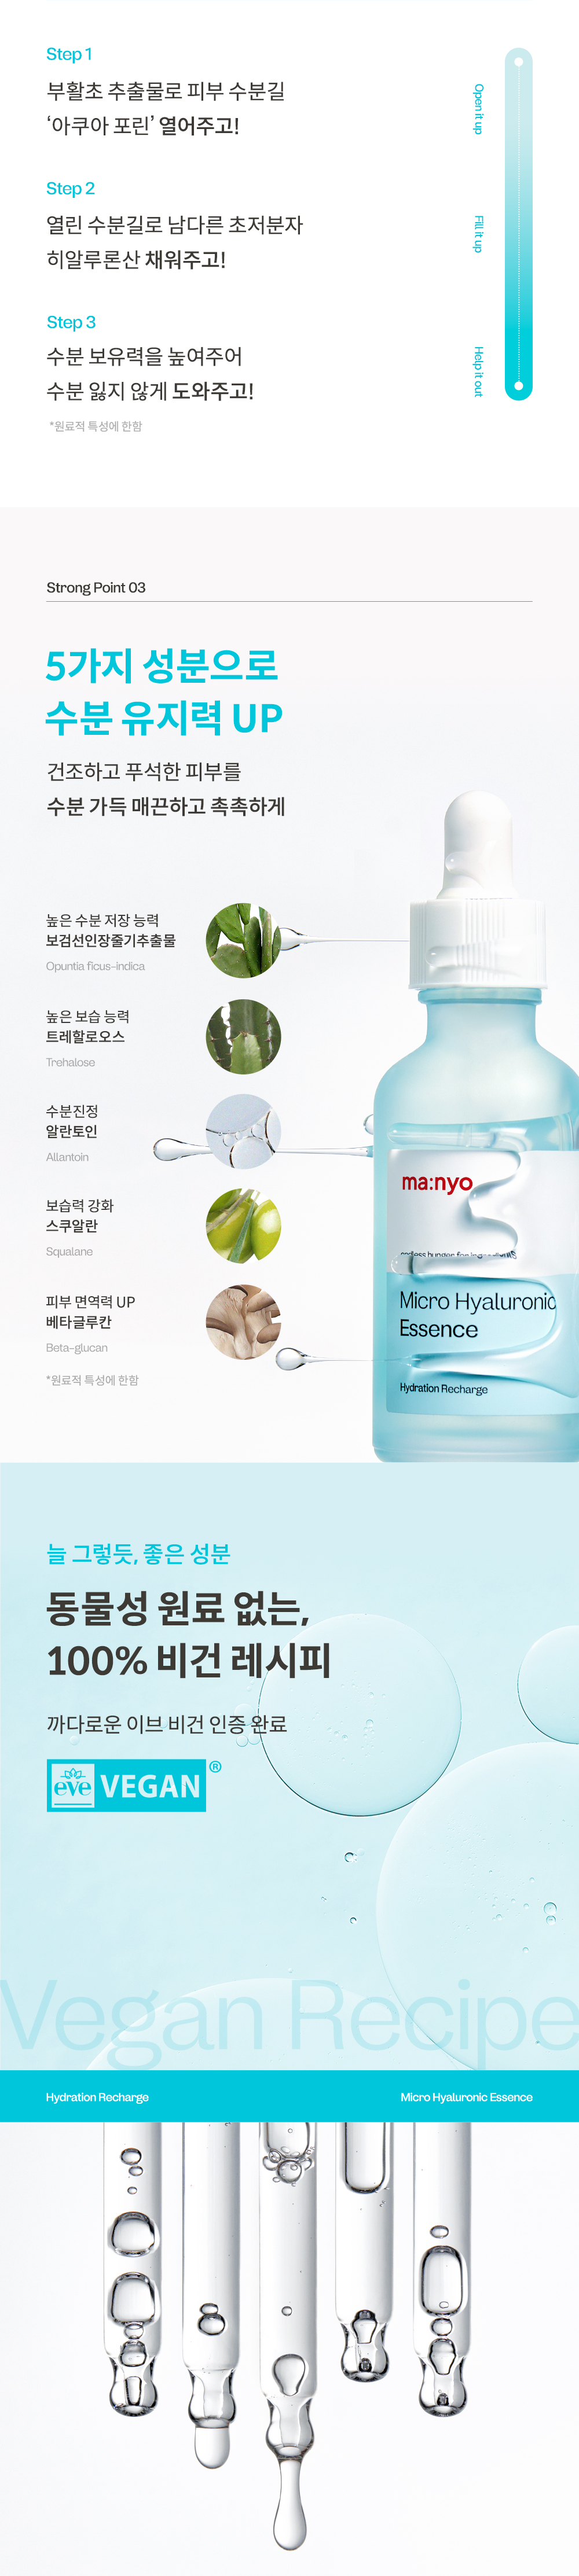 hyaluronic_page_10_092001.jpg